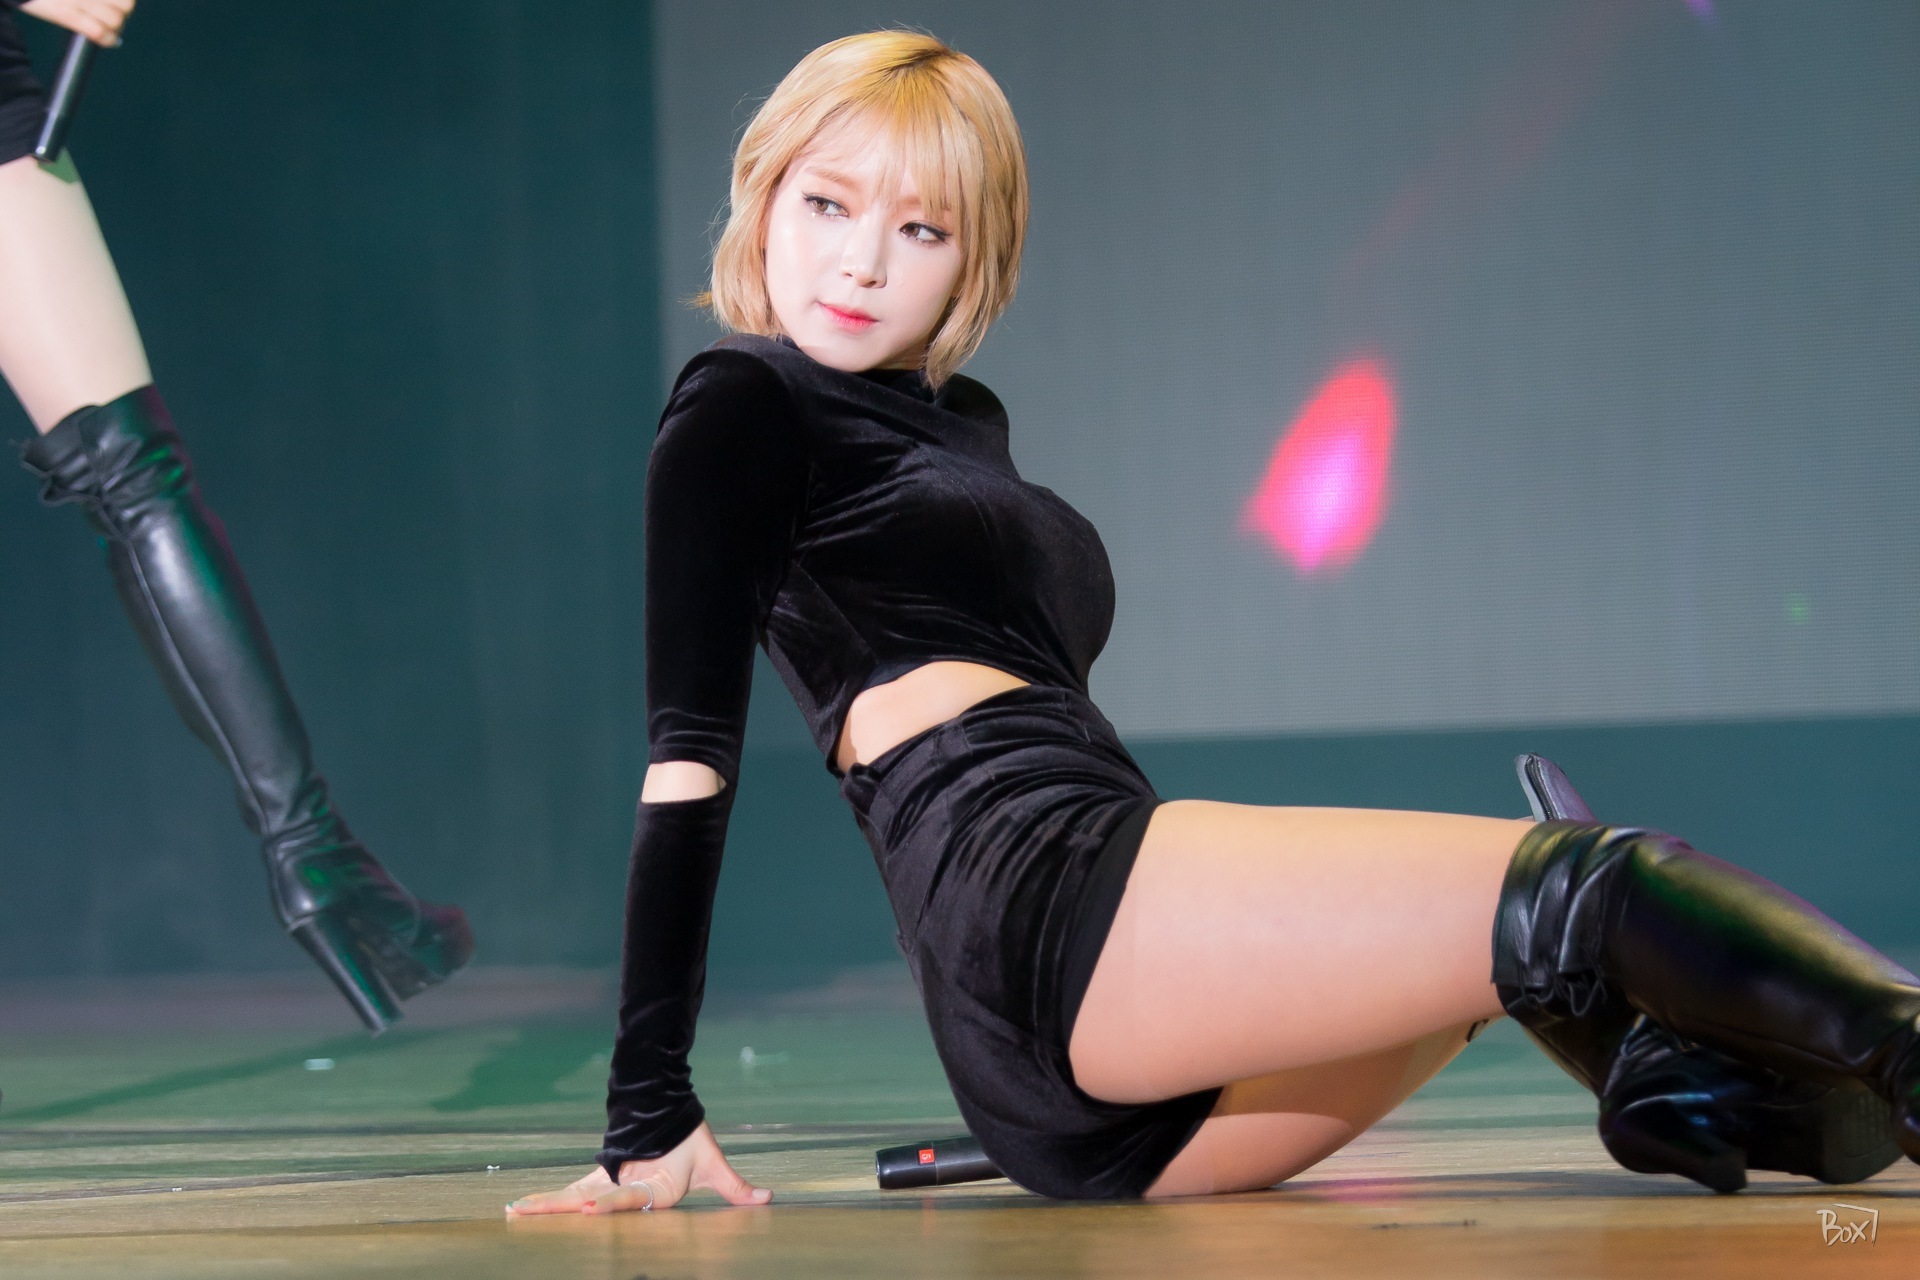 AOA fans have come to the conclusion that this sexy, custom, ninja-like cos...